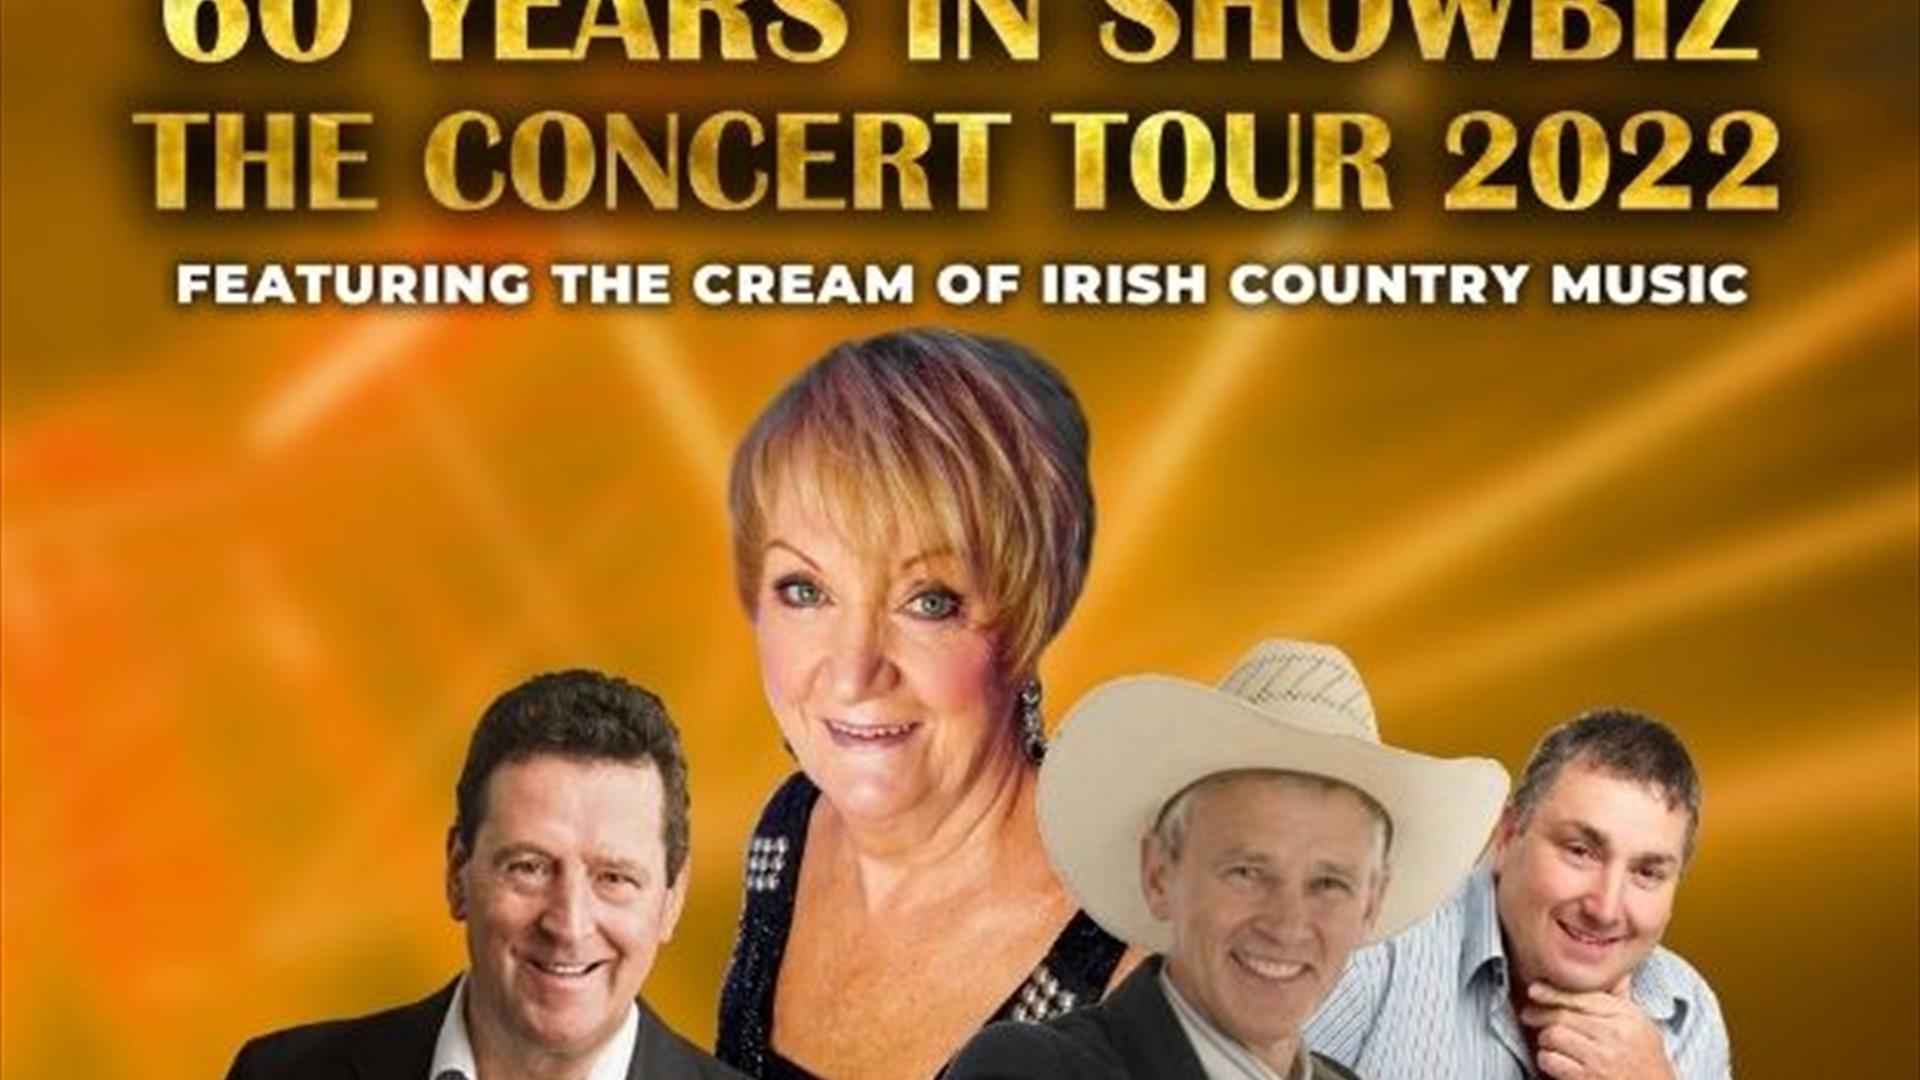 '60 Years in Showbiz'  in a gold sparkling font in the top centre of the image, with a  picture of Philomena Begley smiling alongside photos of variou